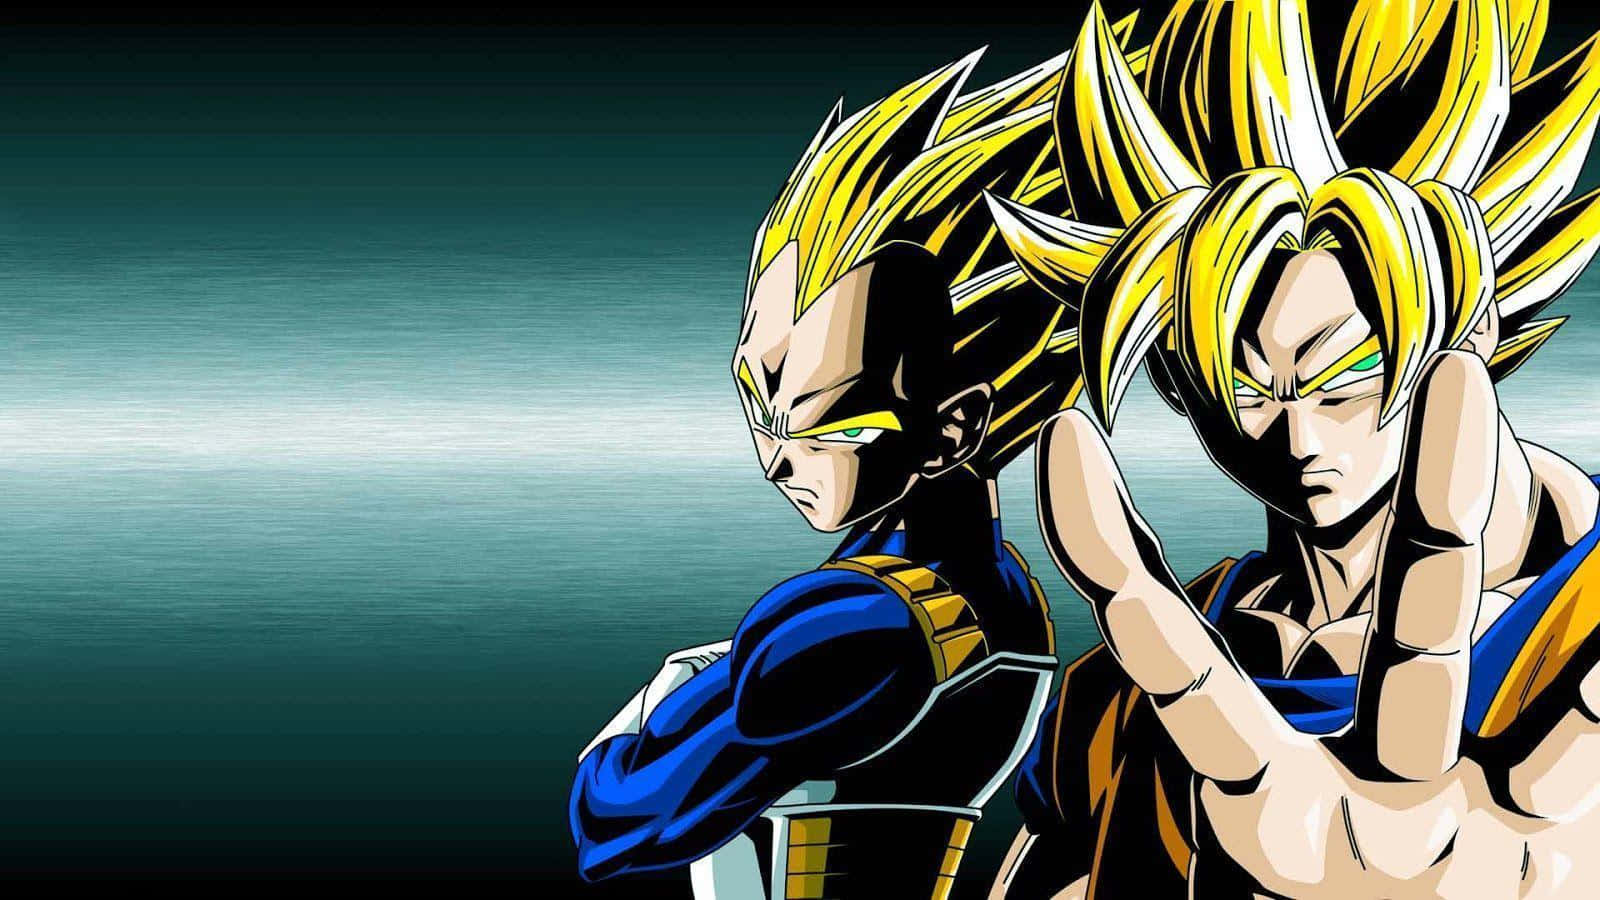 Discover a whole new world with Dragon Ball Xenoverse Wallpaper